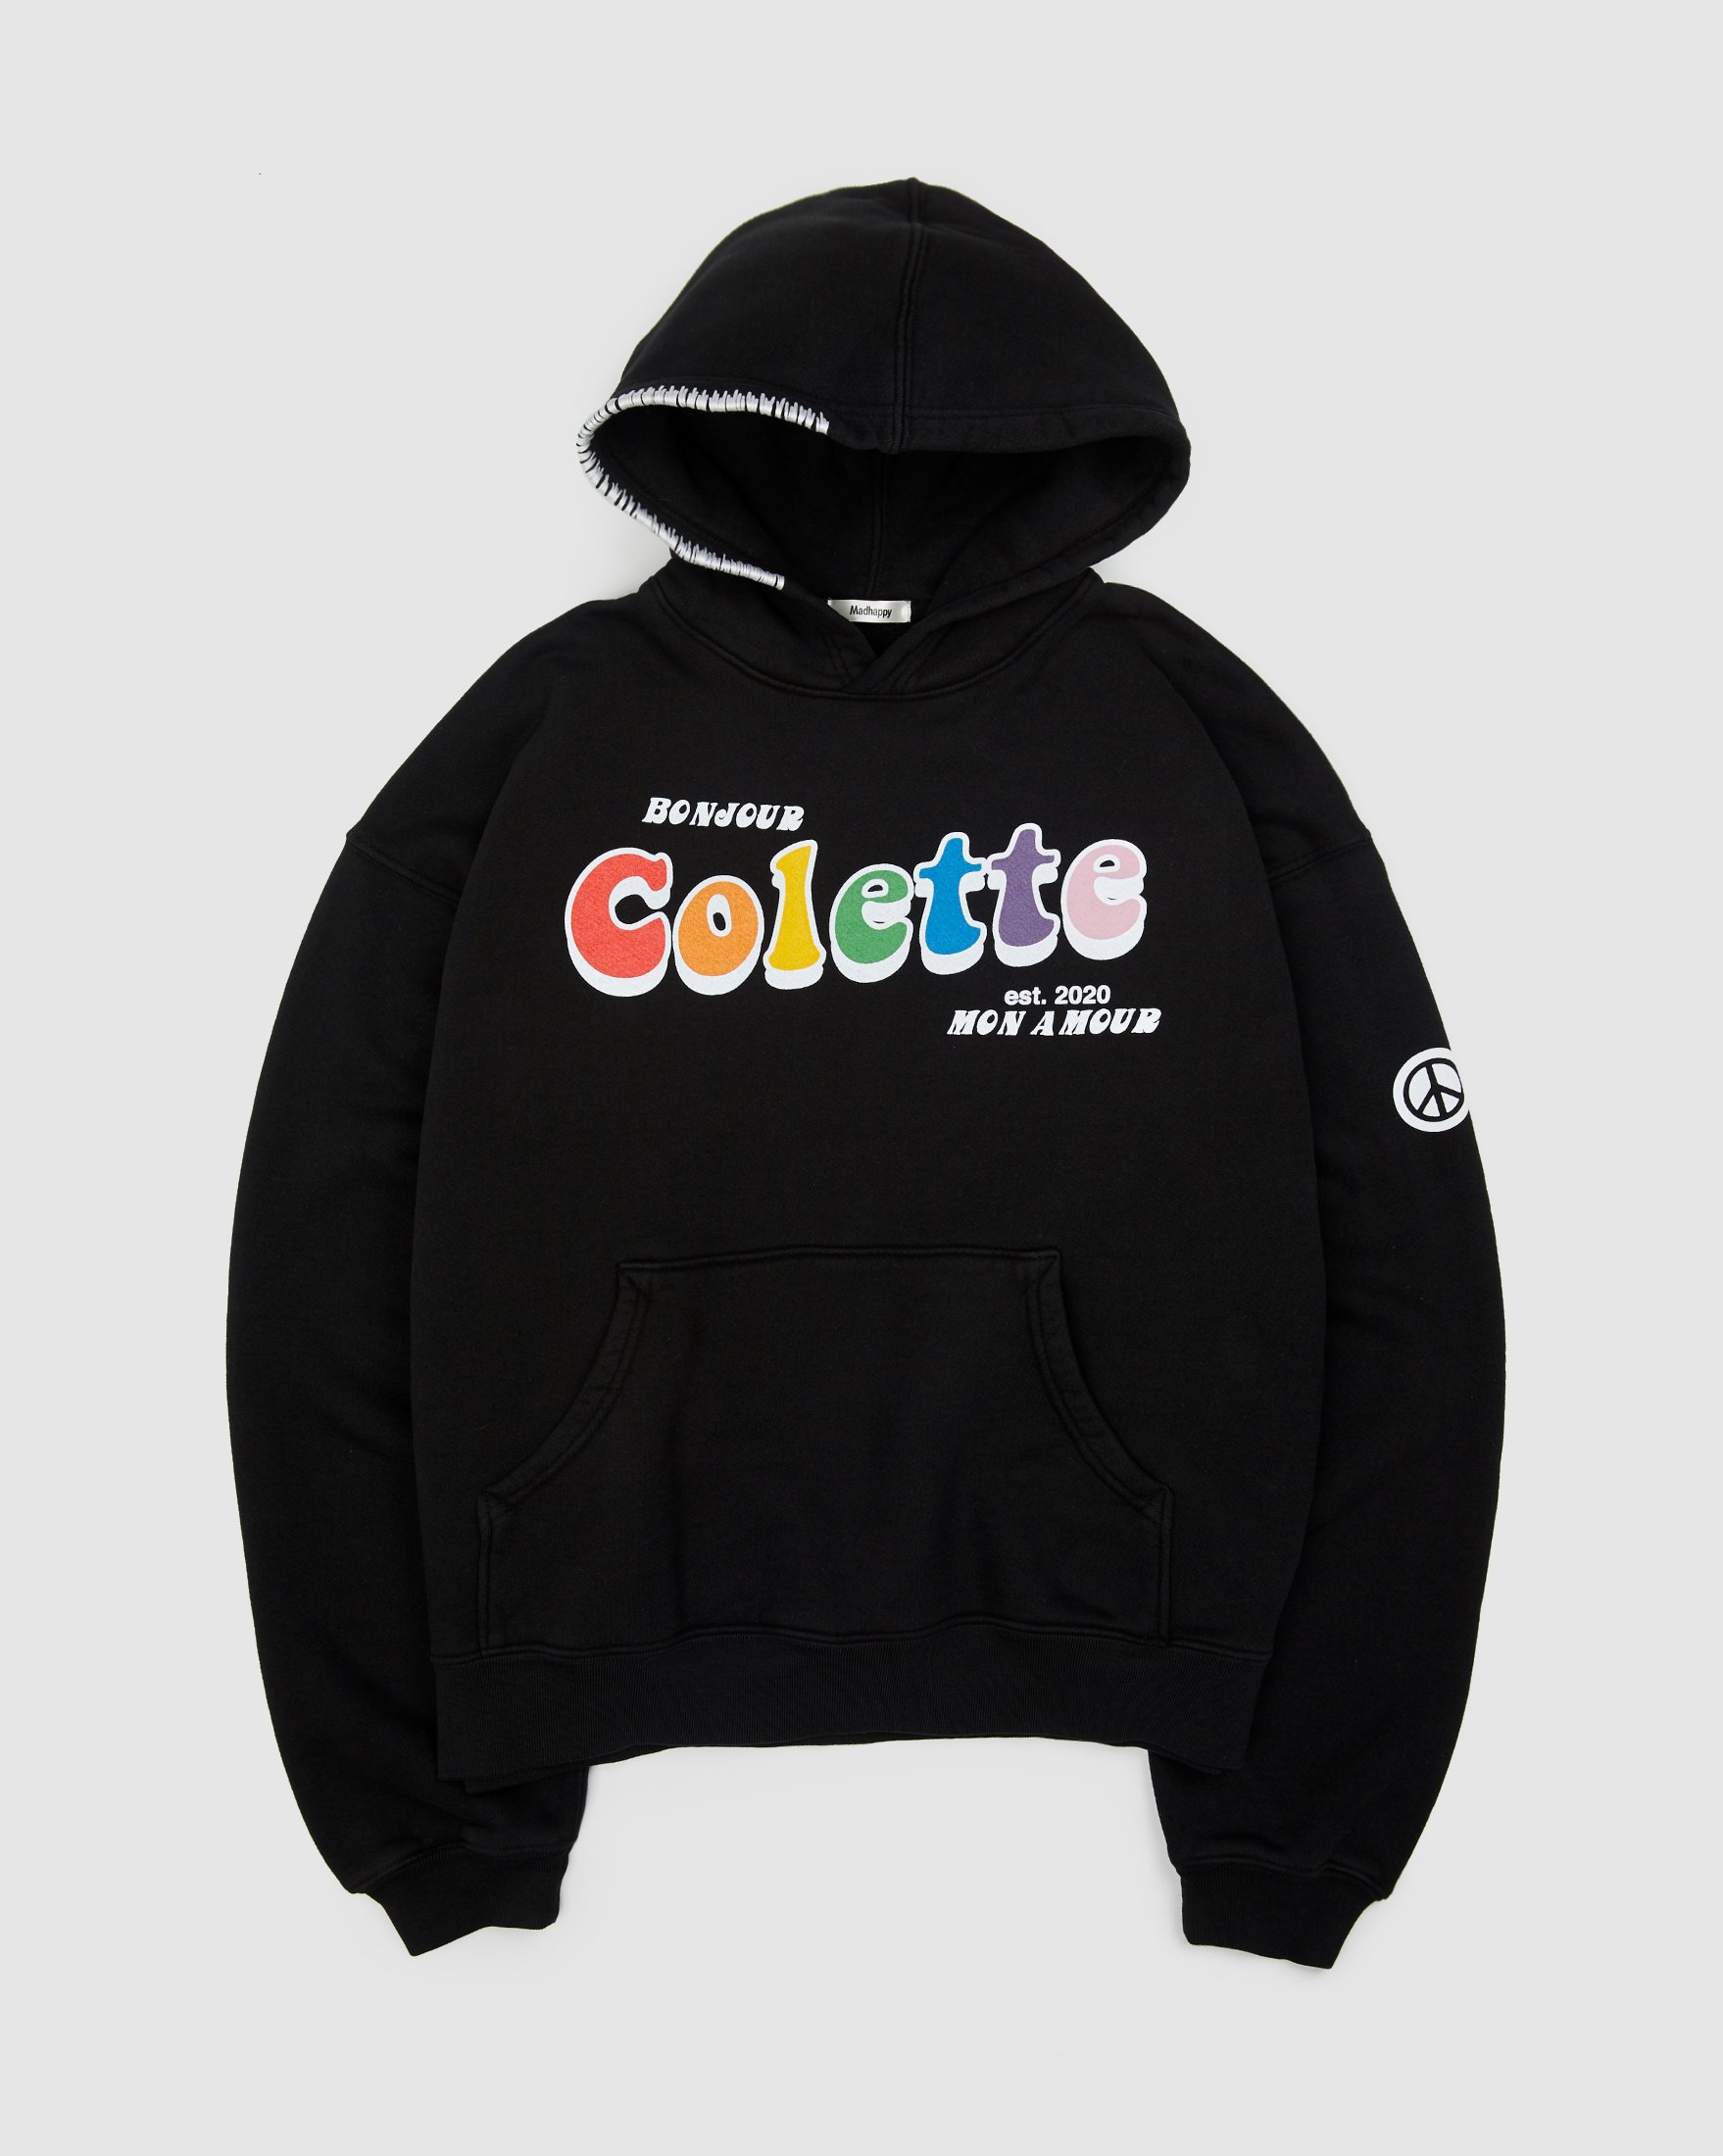 Colette Mon Amour - Madhappy Hoodie Black - Clothing - Black - Image 1